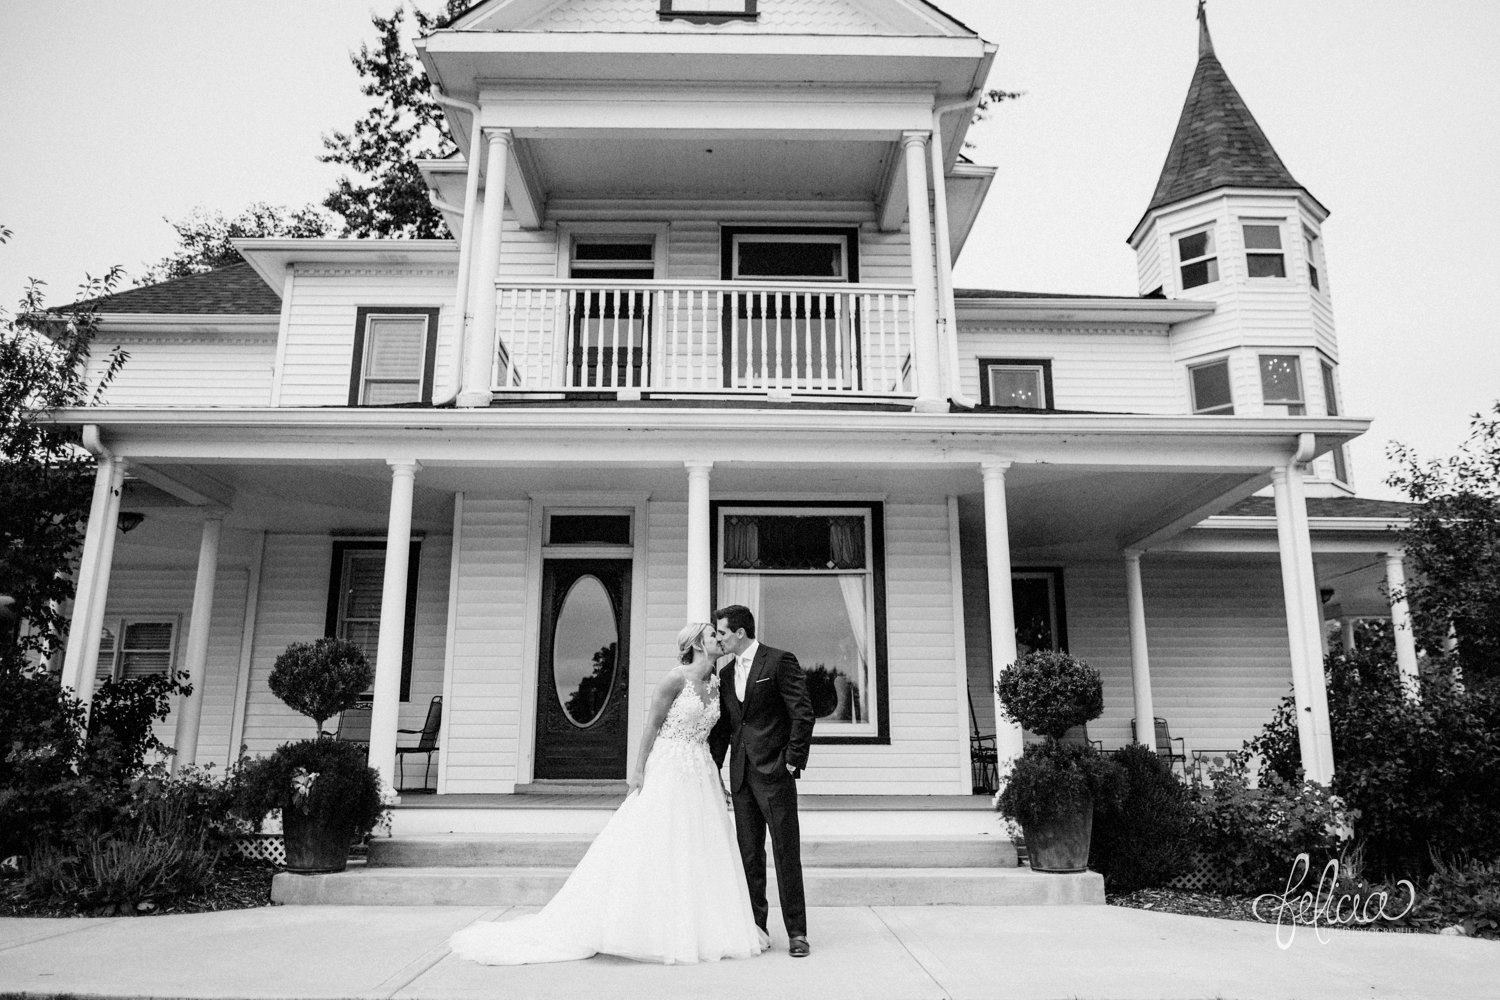 images by feliciathephotographer.com | destination wedding photographer | kansas city | eighteen ninety | classic | first look | pre ceremony | floral lace backed dress | bridal extraordinaire | pronovias | J. H. & sons clothier | navy suit | true love | black and white | kiss | 